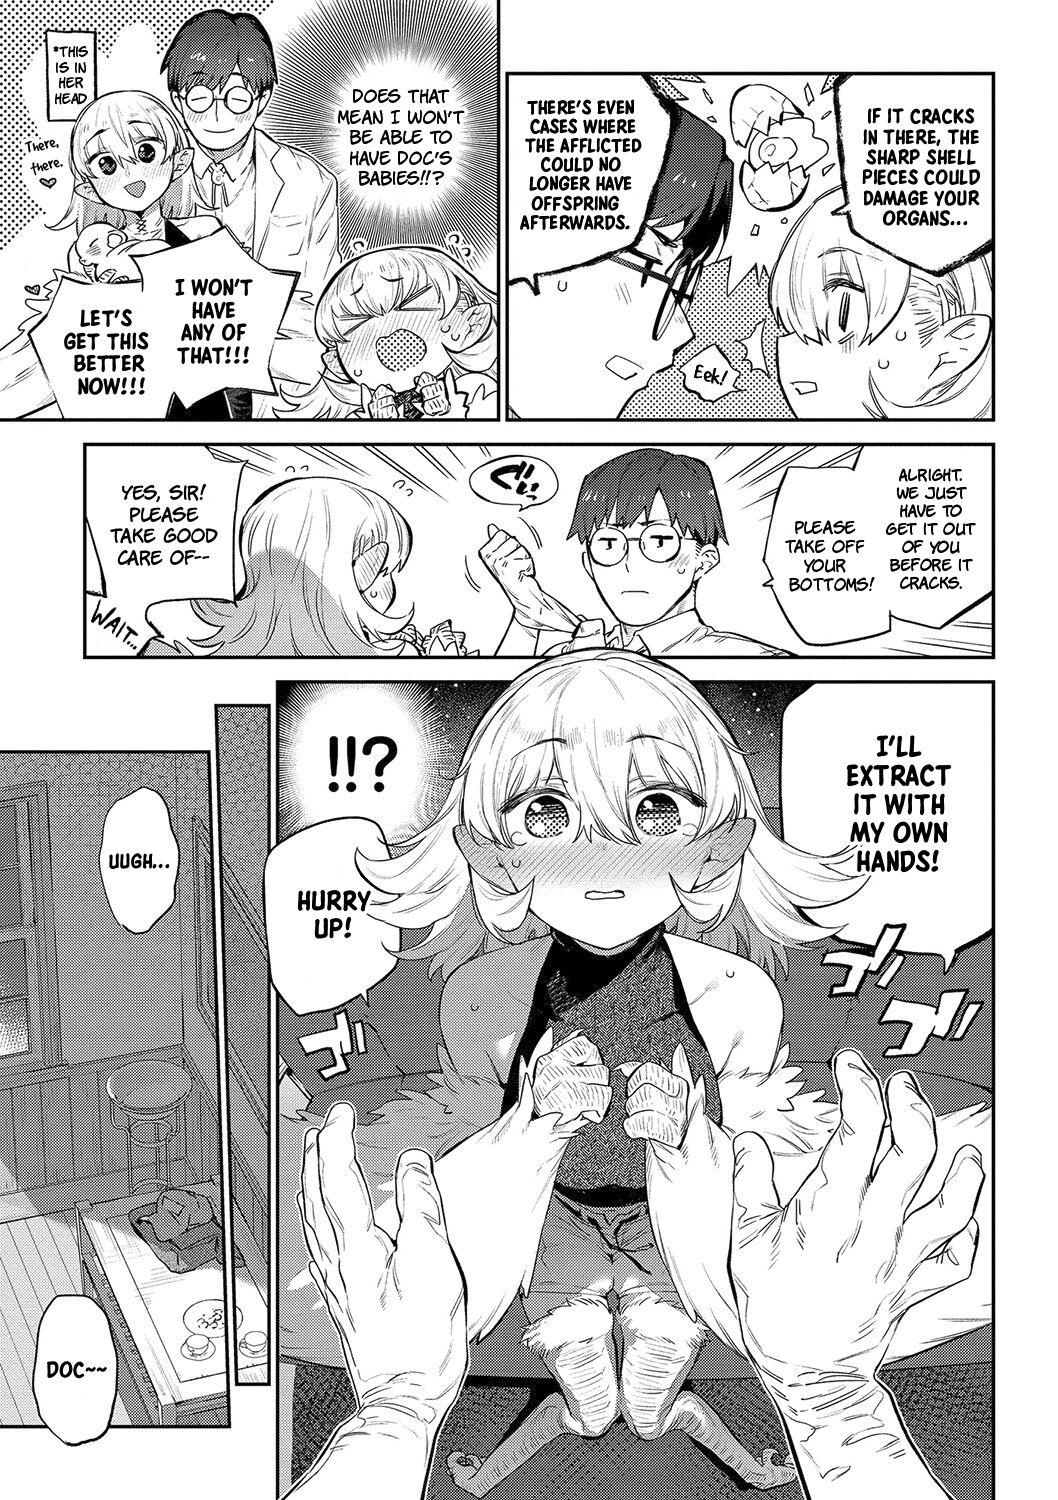 Ihou no Otome - Monster Girls in Another World 129